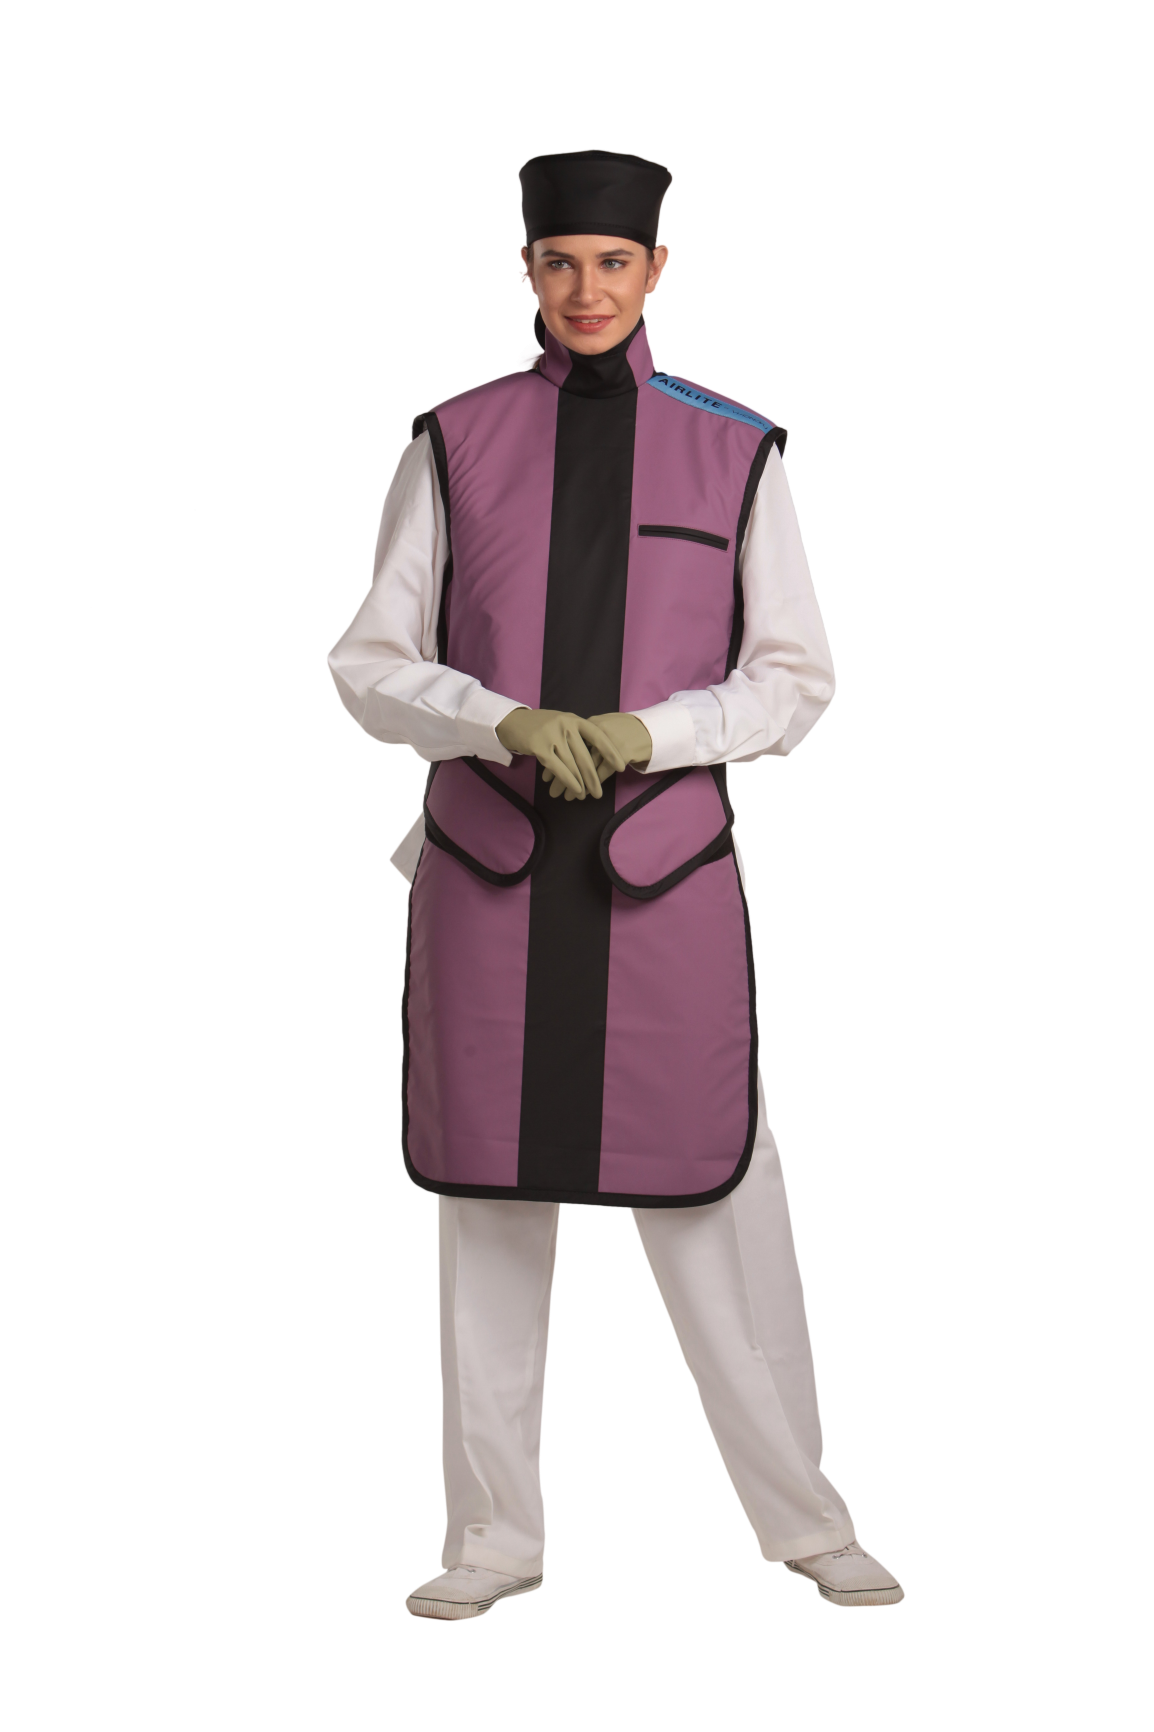 Full frontal view of a female model, her hands clasped together below her chest, wearing a head shield, medical gloves, and a coat apron with an integrated thyroid guard. The apron is mauve in color with a Jet black center line and has closed velcro fasteners by the sides.